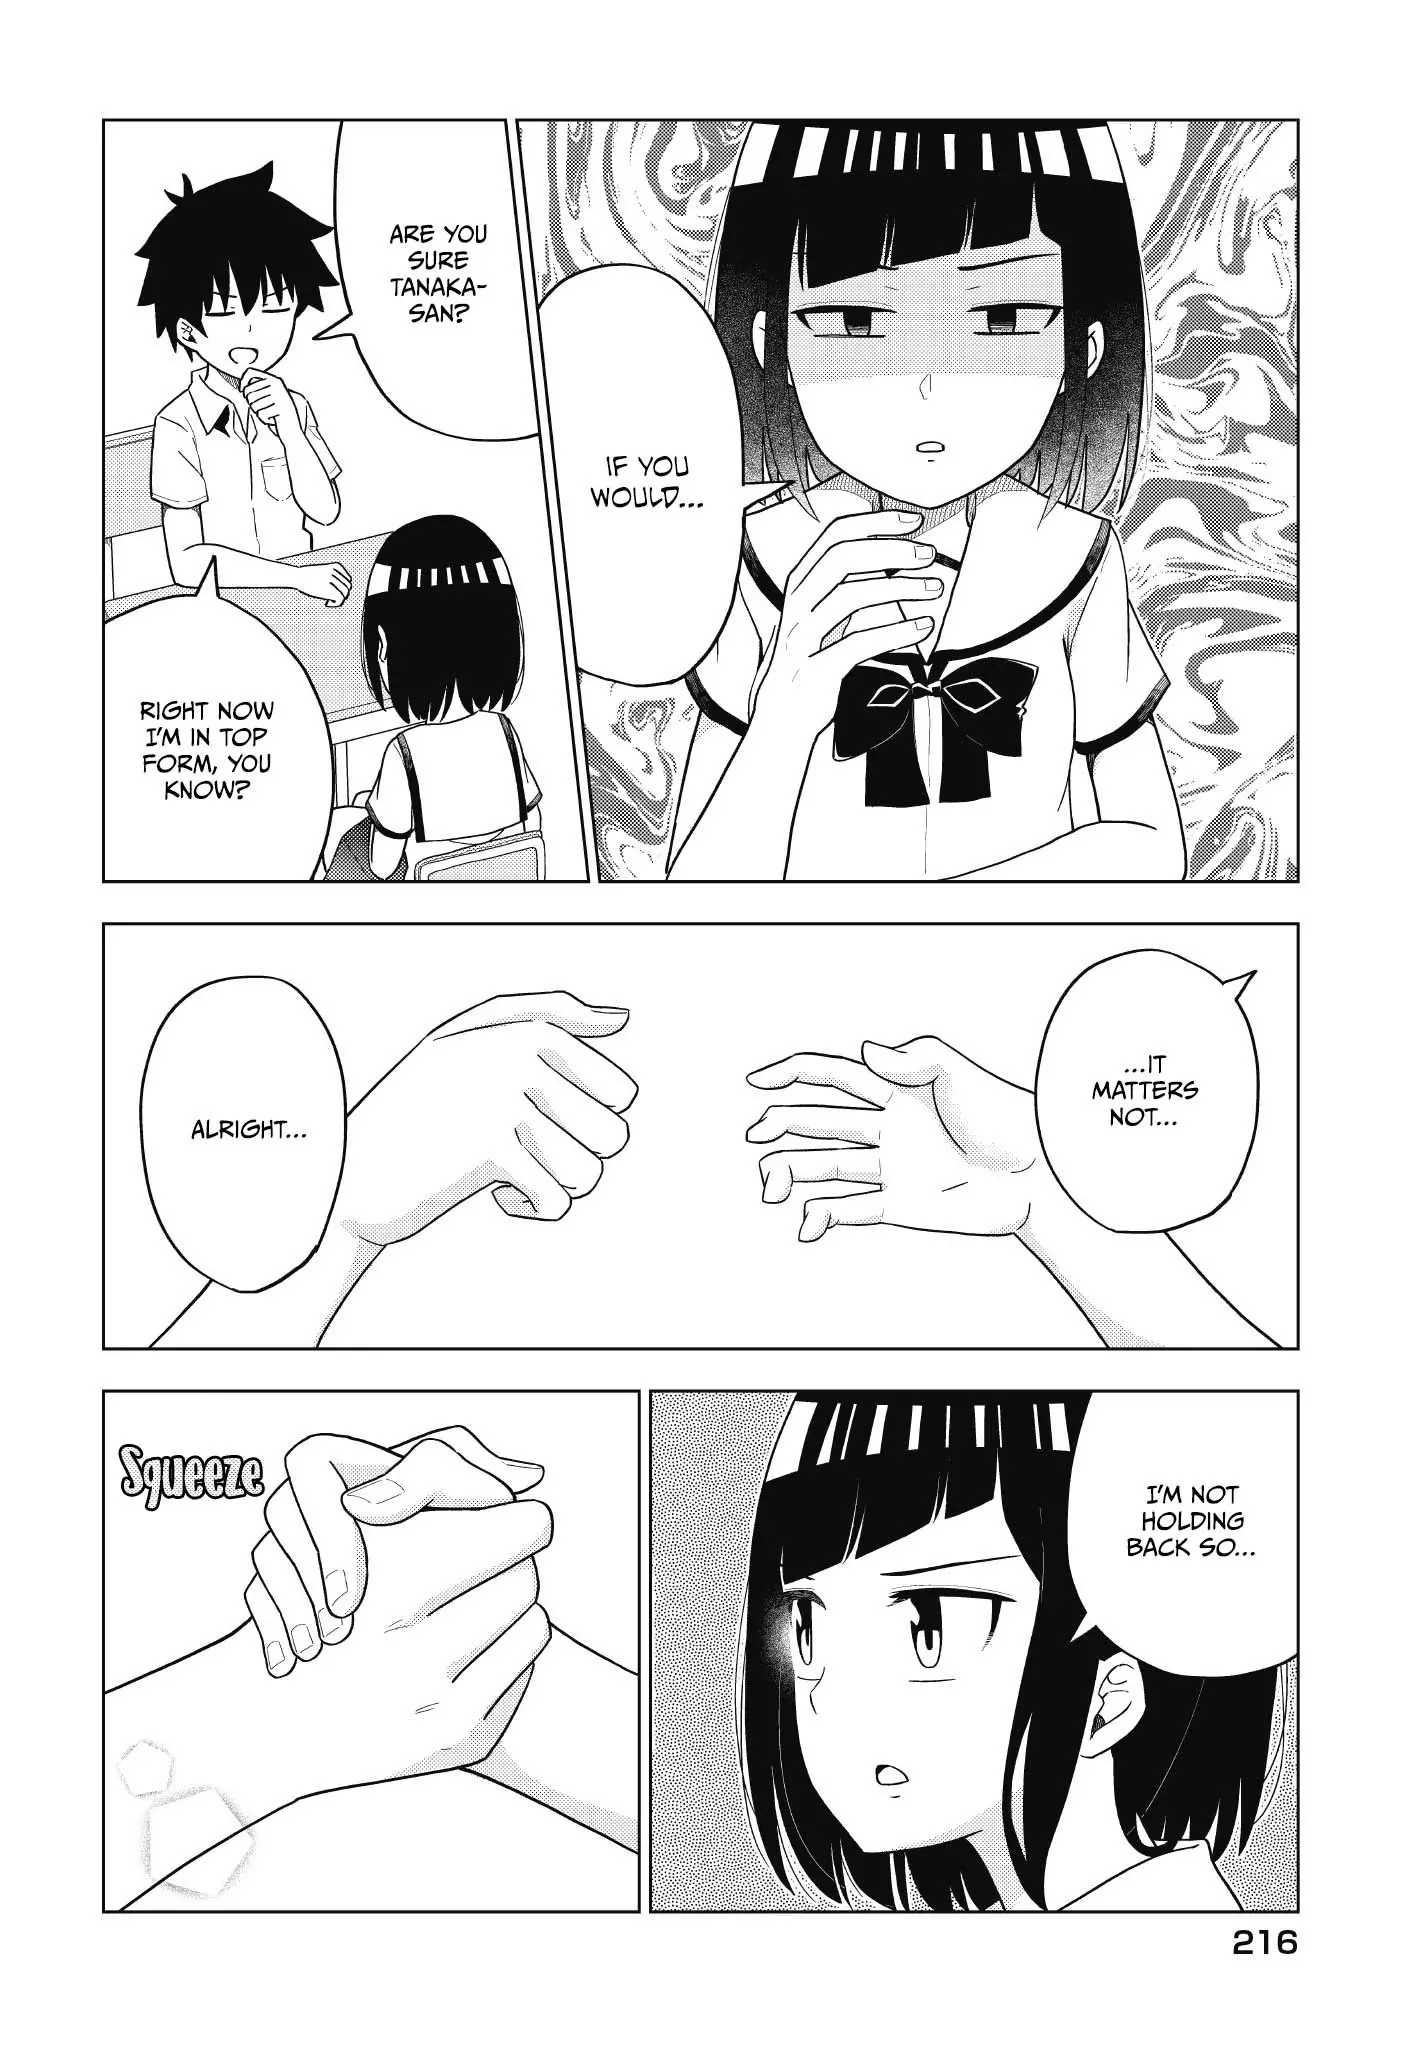 My Classmate Tanaka-San Is Super Scary - 49 page 3